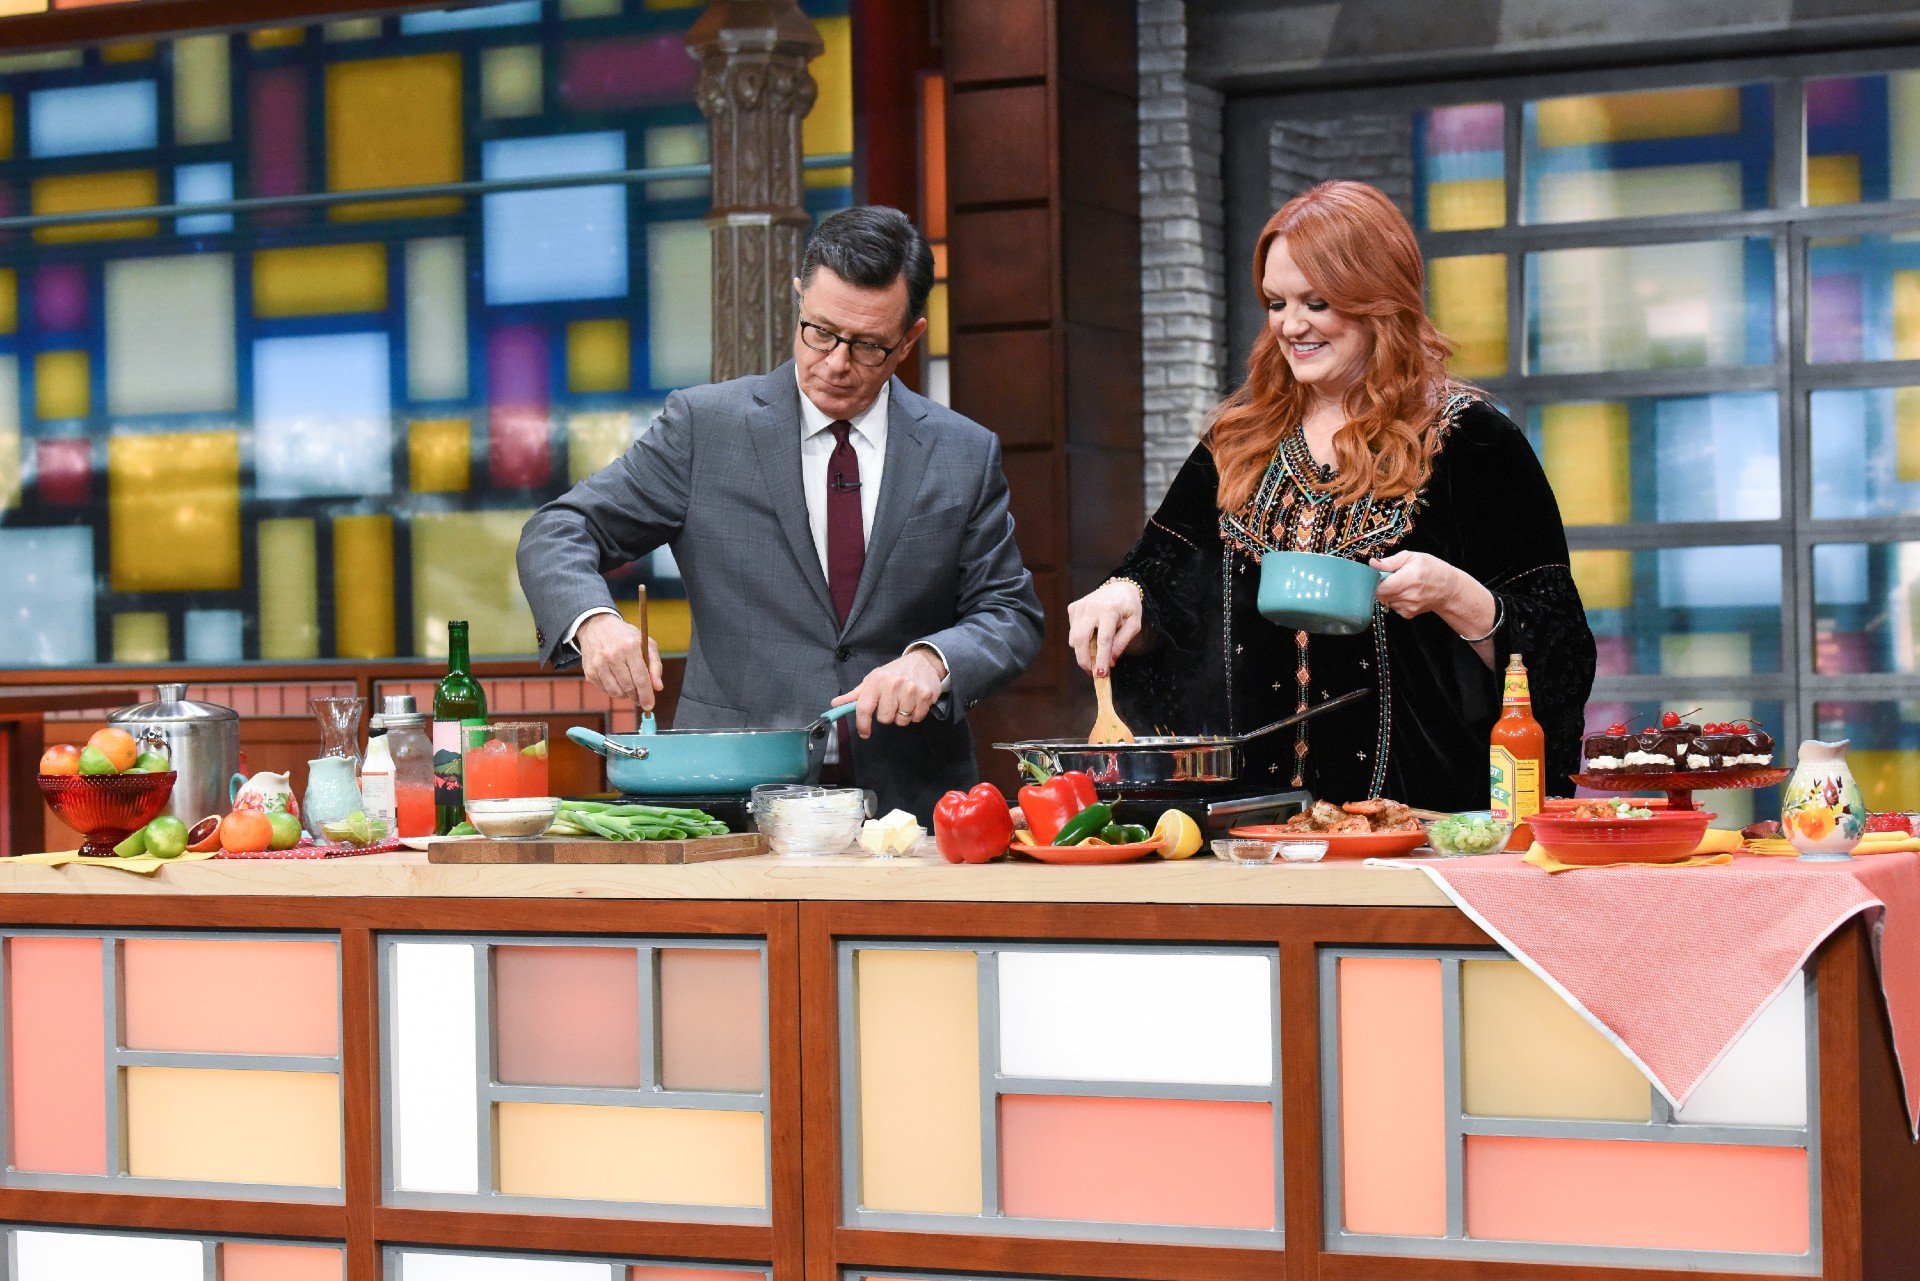 Ree Drummond smiles while wearing a black top during a cooking demonstration with Stephen Colbert